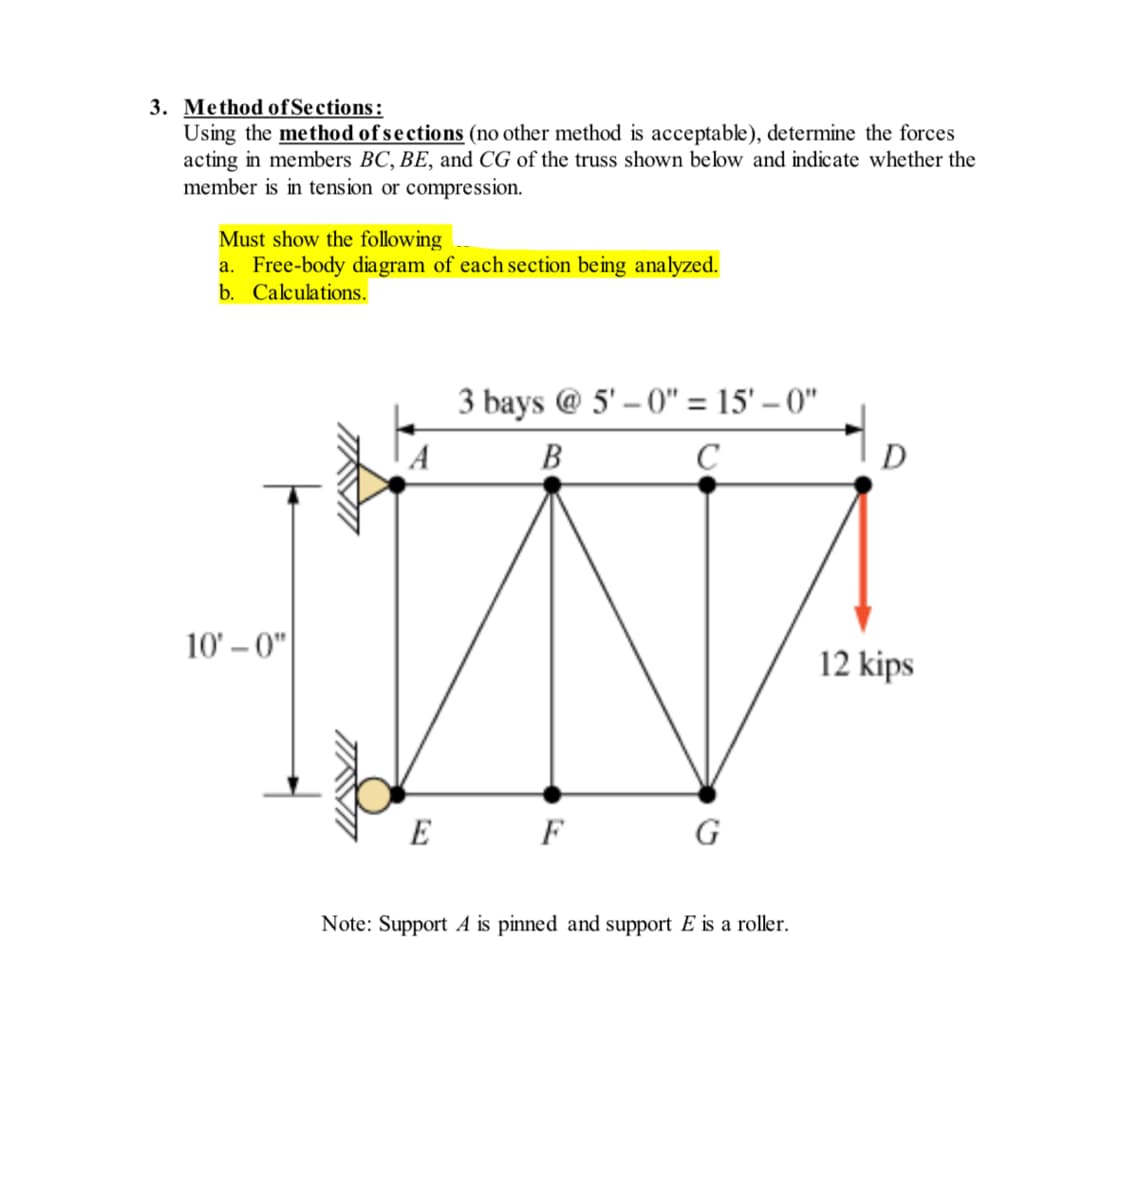 3. Method of Sections:
Using the method of sections (no other method is acceptable), determine the forces
acting in members BC, BE, and CG of the truss shown below and indicate whether the
member is in tension or compression.
Must show the following
a. Free-body diagram of each section being analyzed.
b.
Calculations.
10'-0"
TIKVI
A
E
3 bays @ 5'-0" = 15'-0"
B
C
F
G
Note: Support A is pinned and support E is a roller.
to
D
12 kips